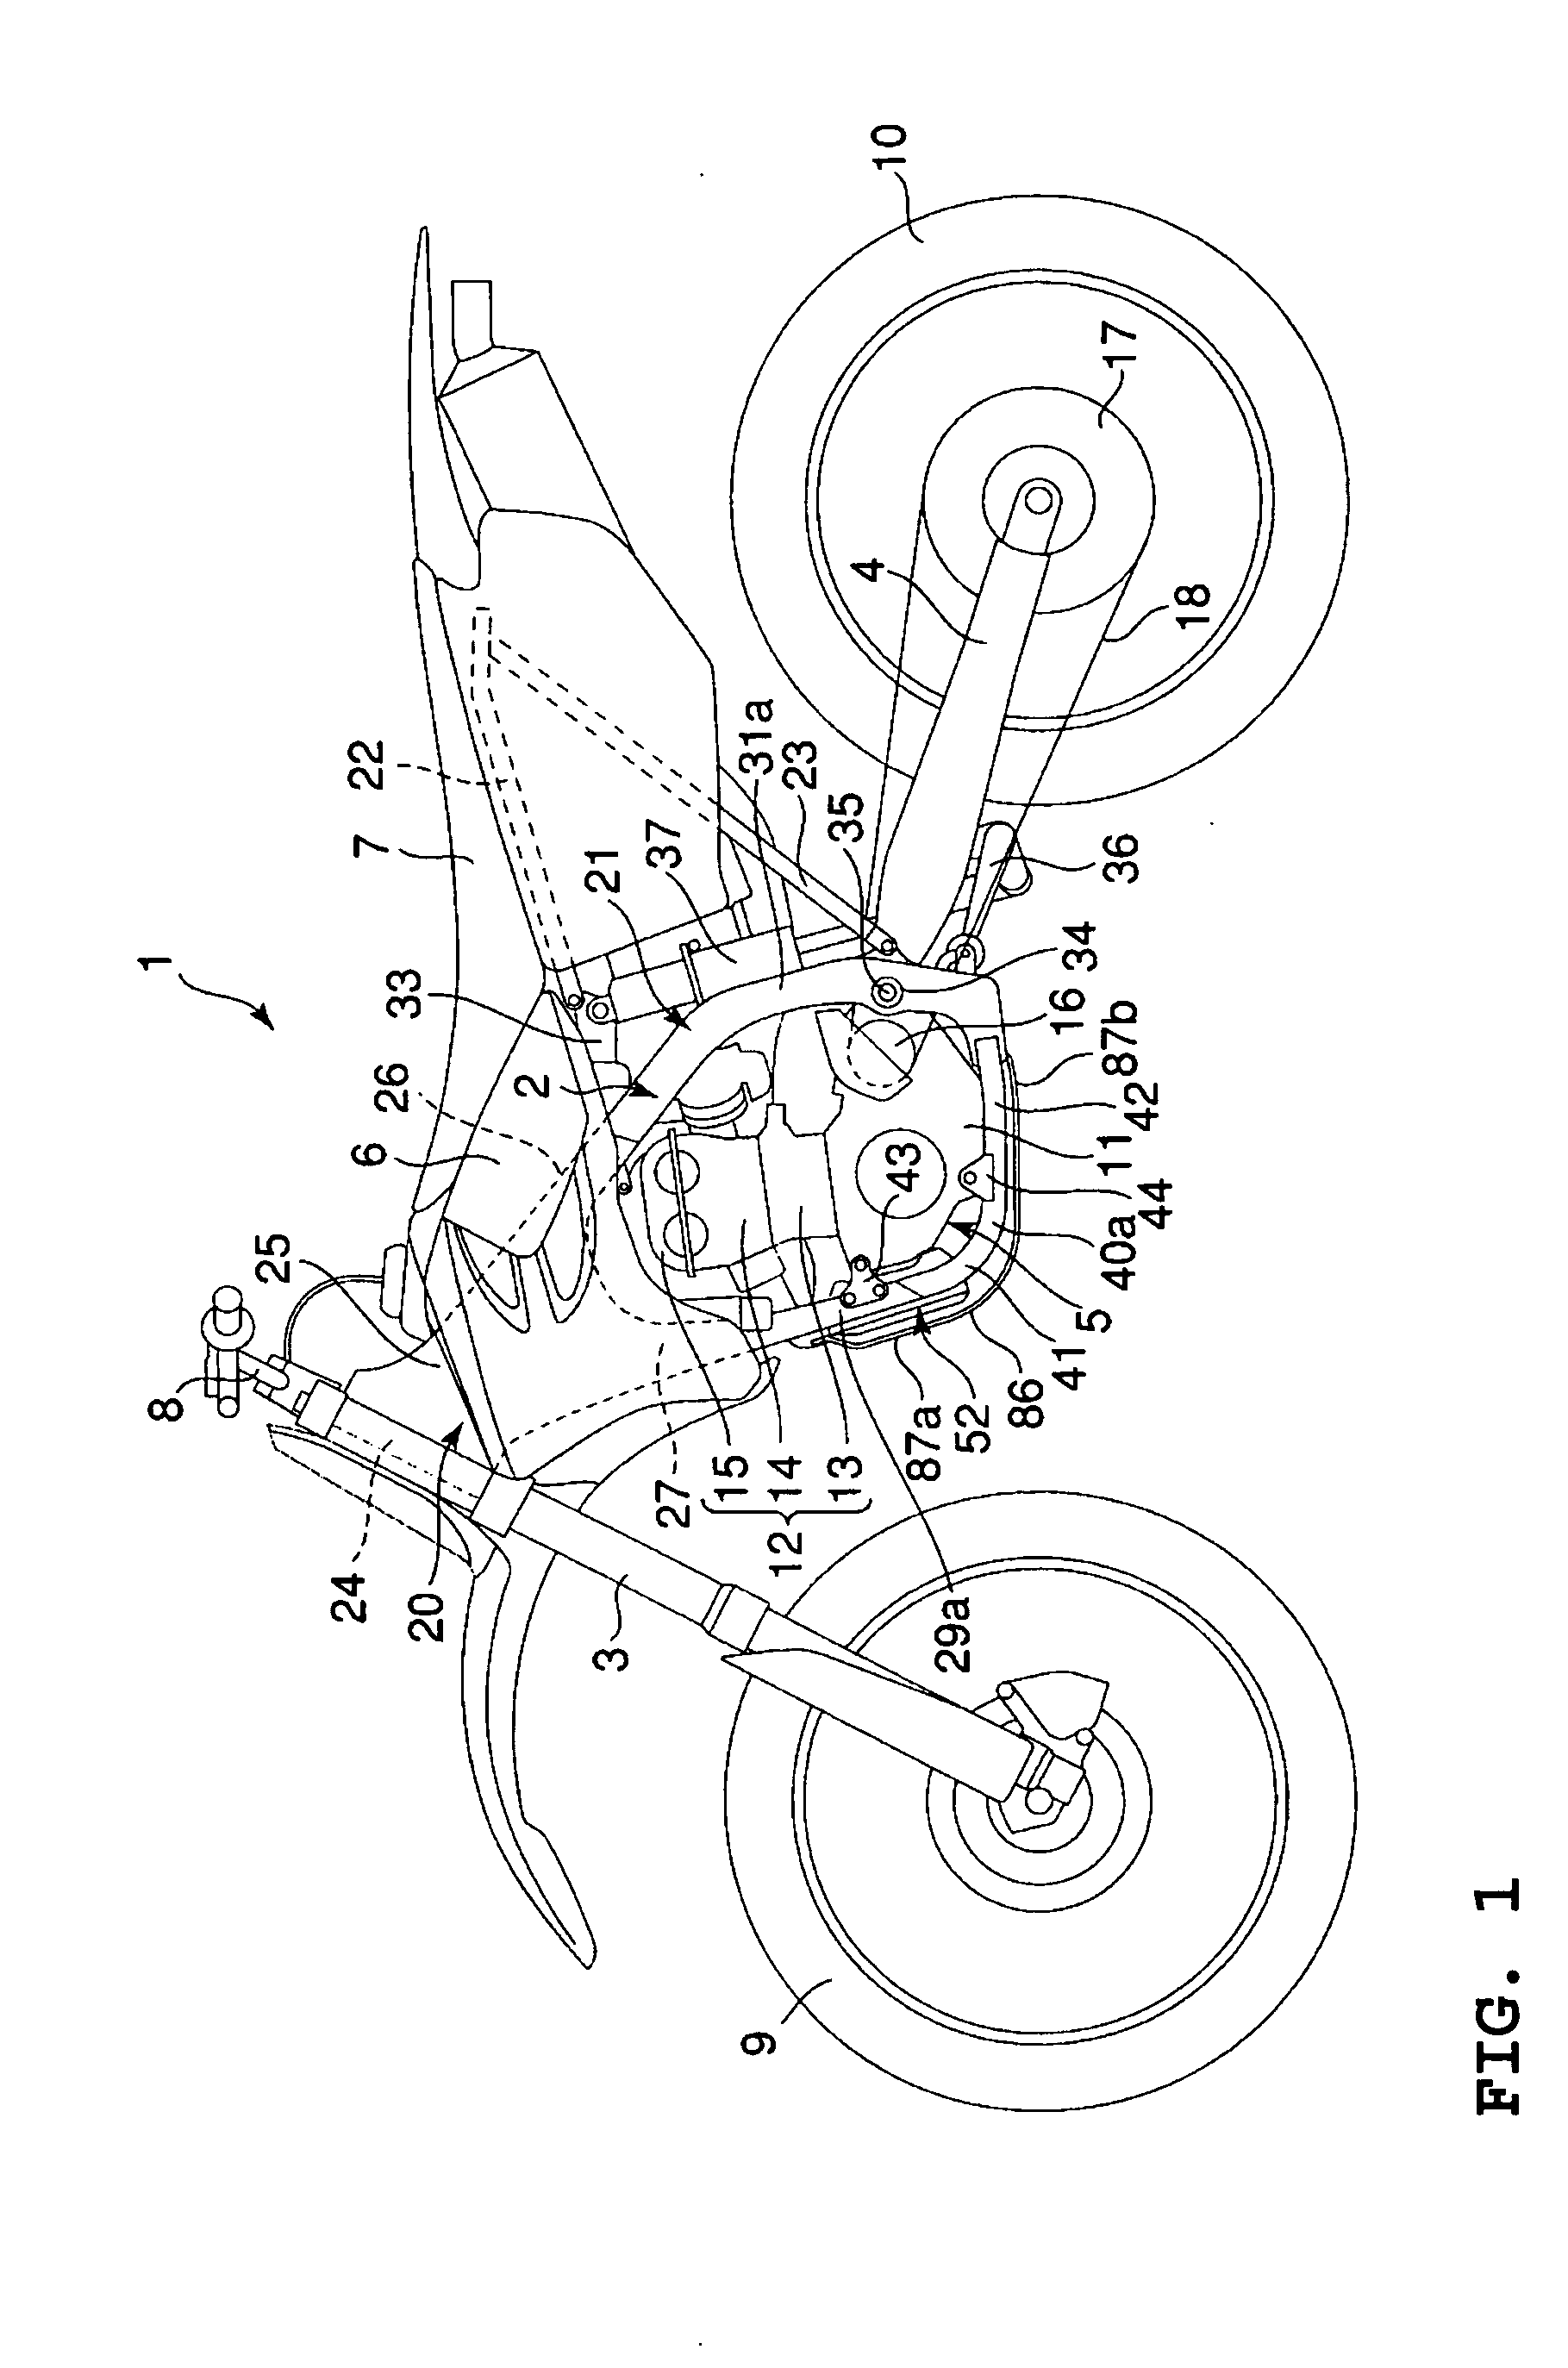 Dry sump type lubrication device for a motorcycle